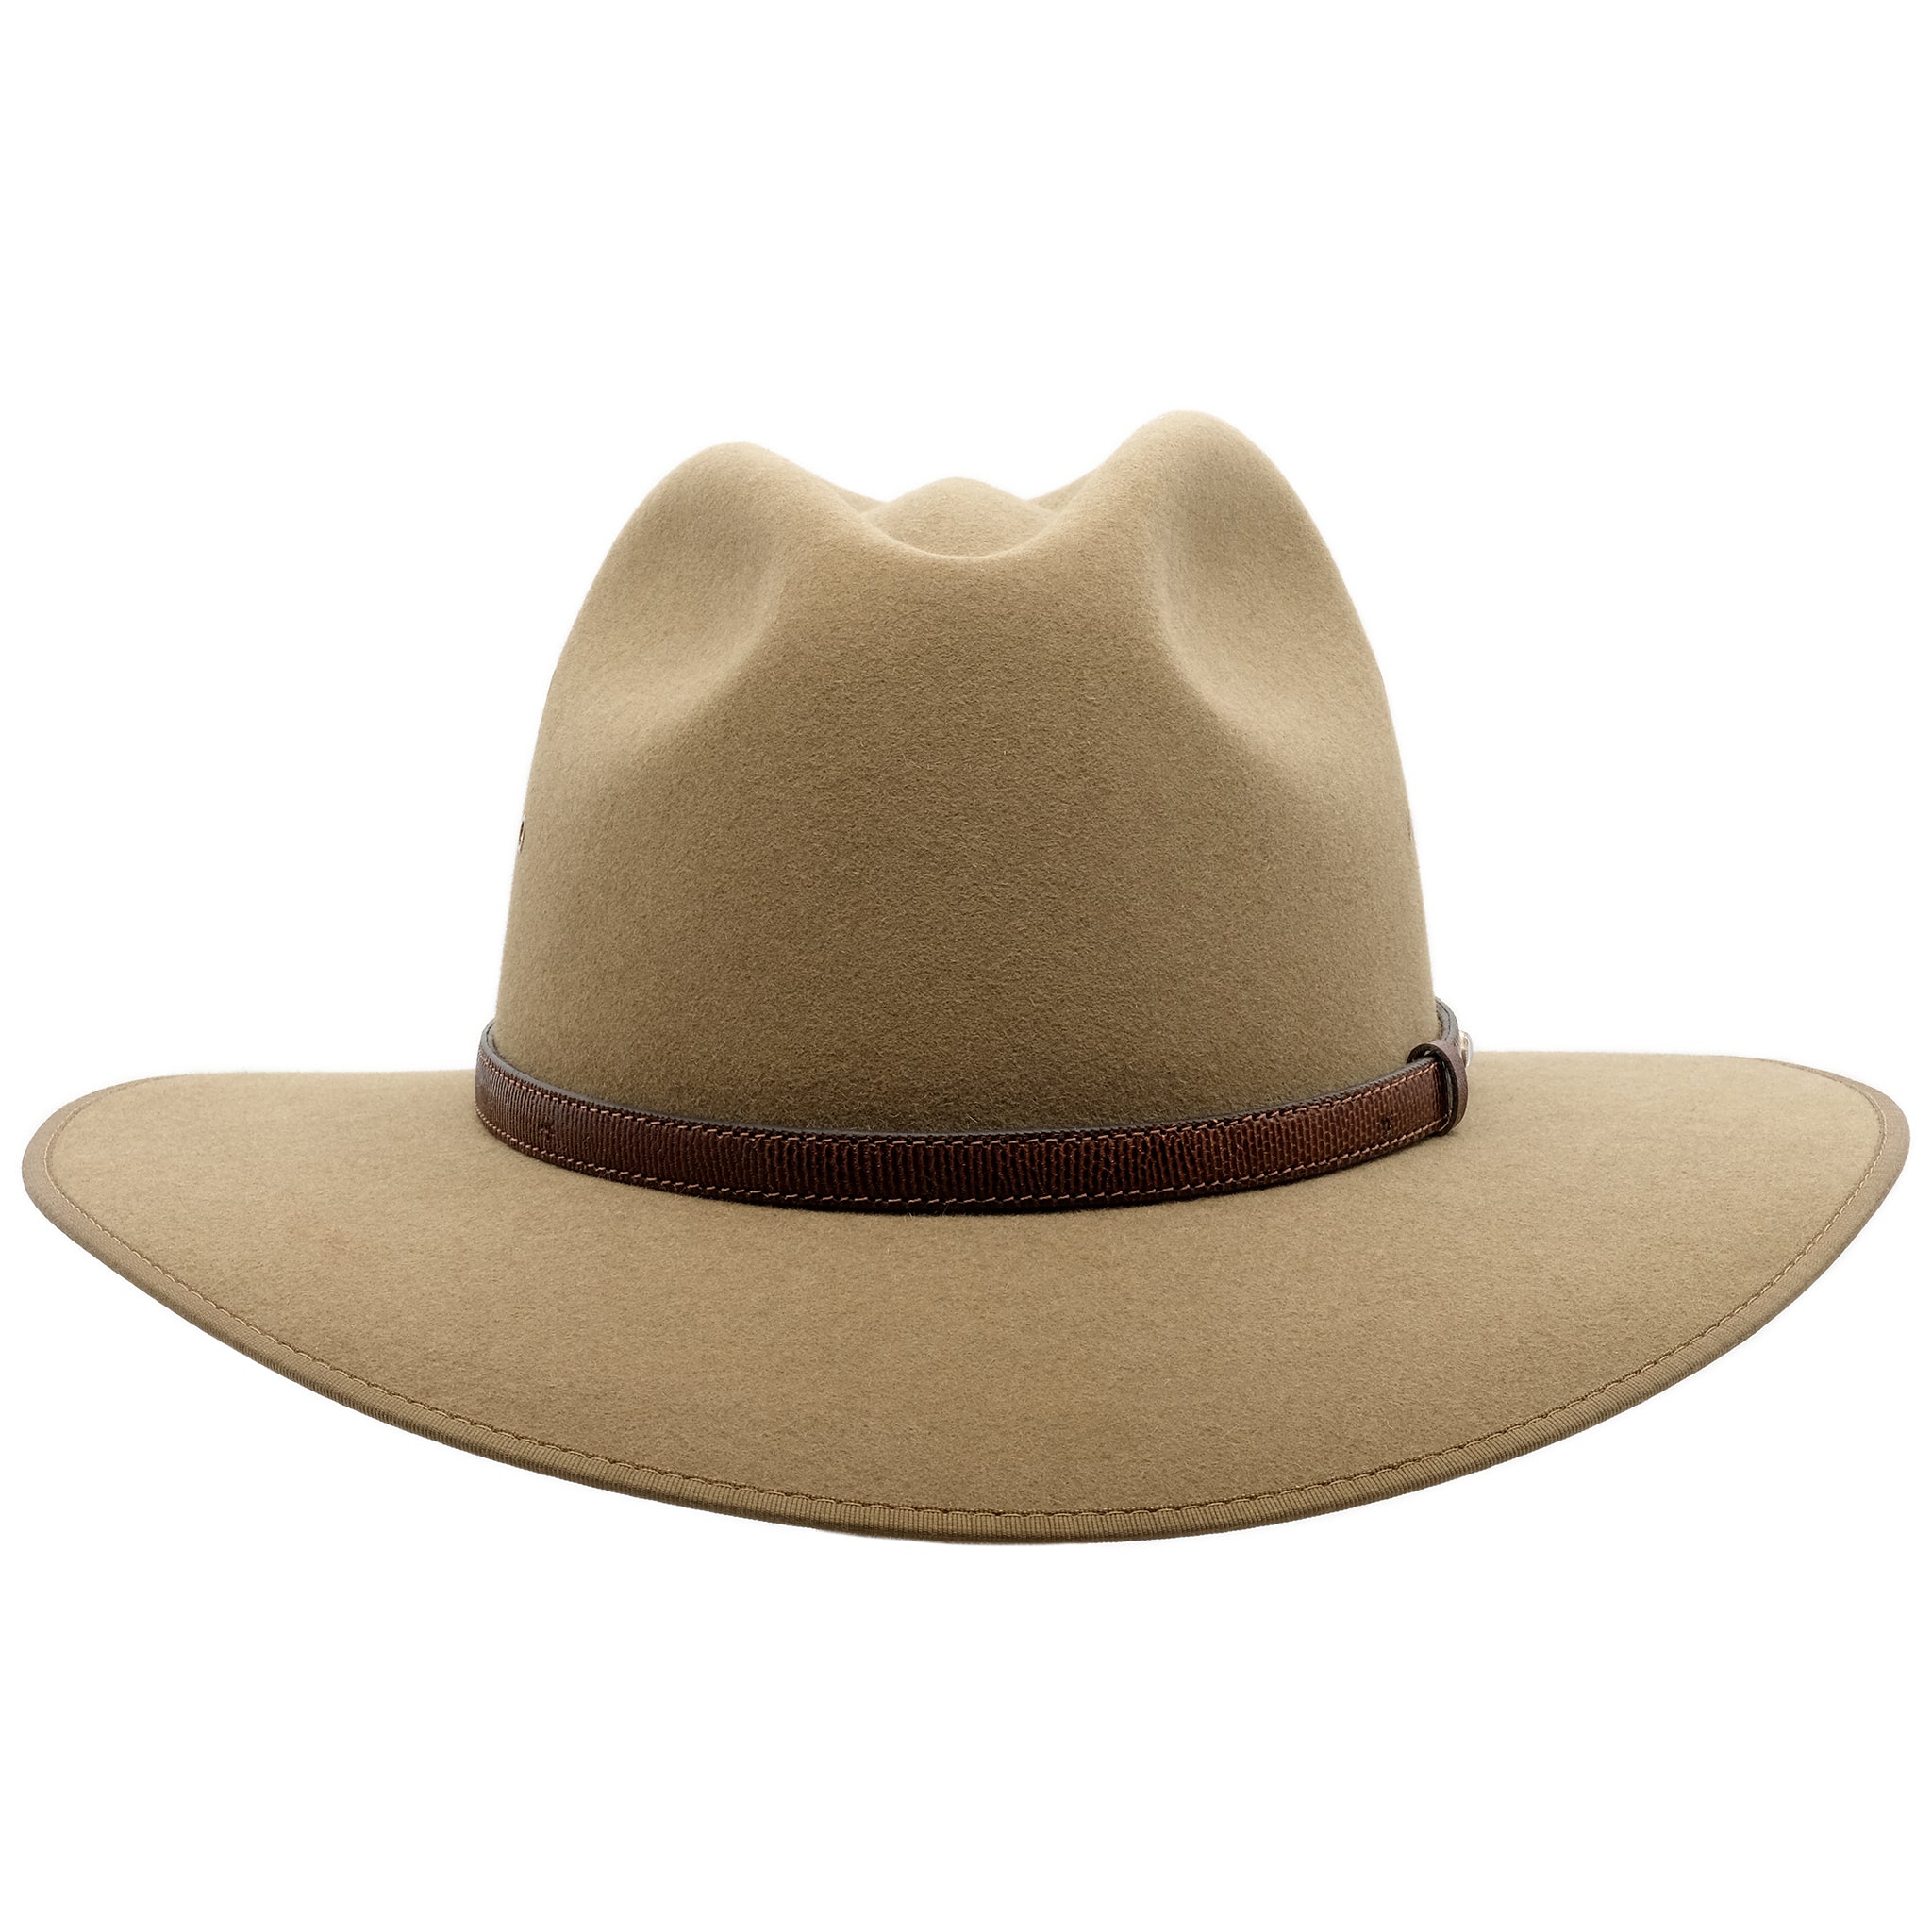 Front view of the Akubra Coober Pedy hat in Santone colour